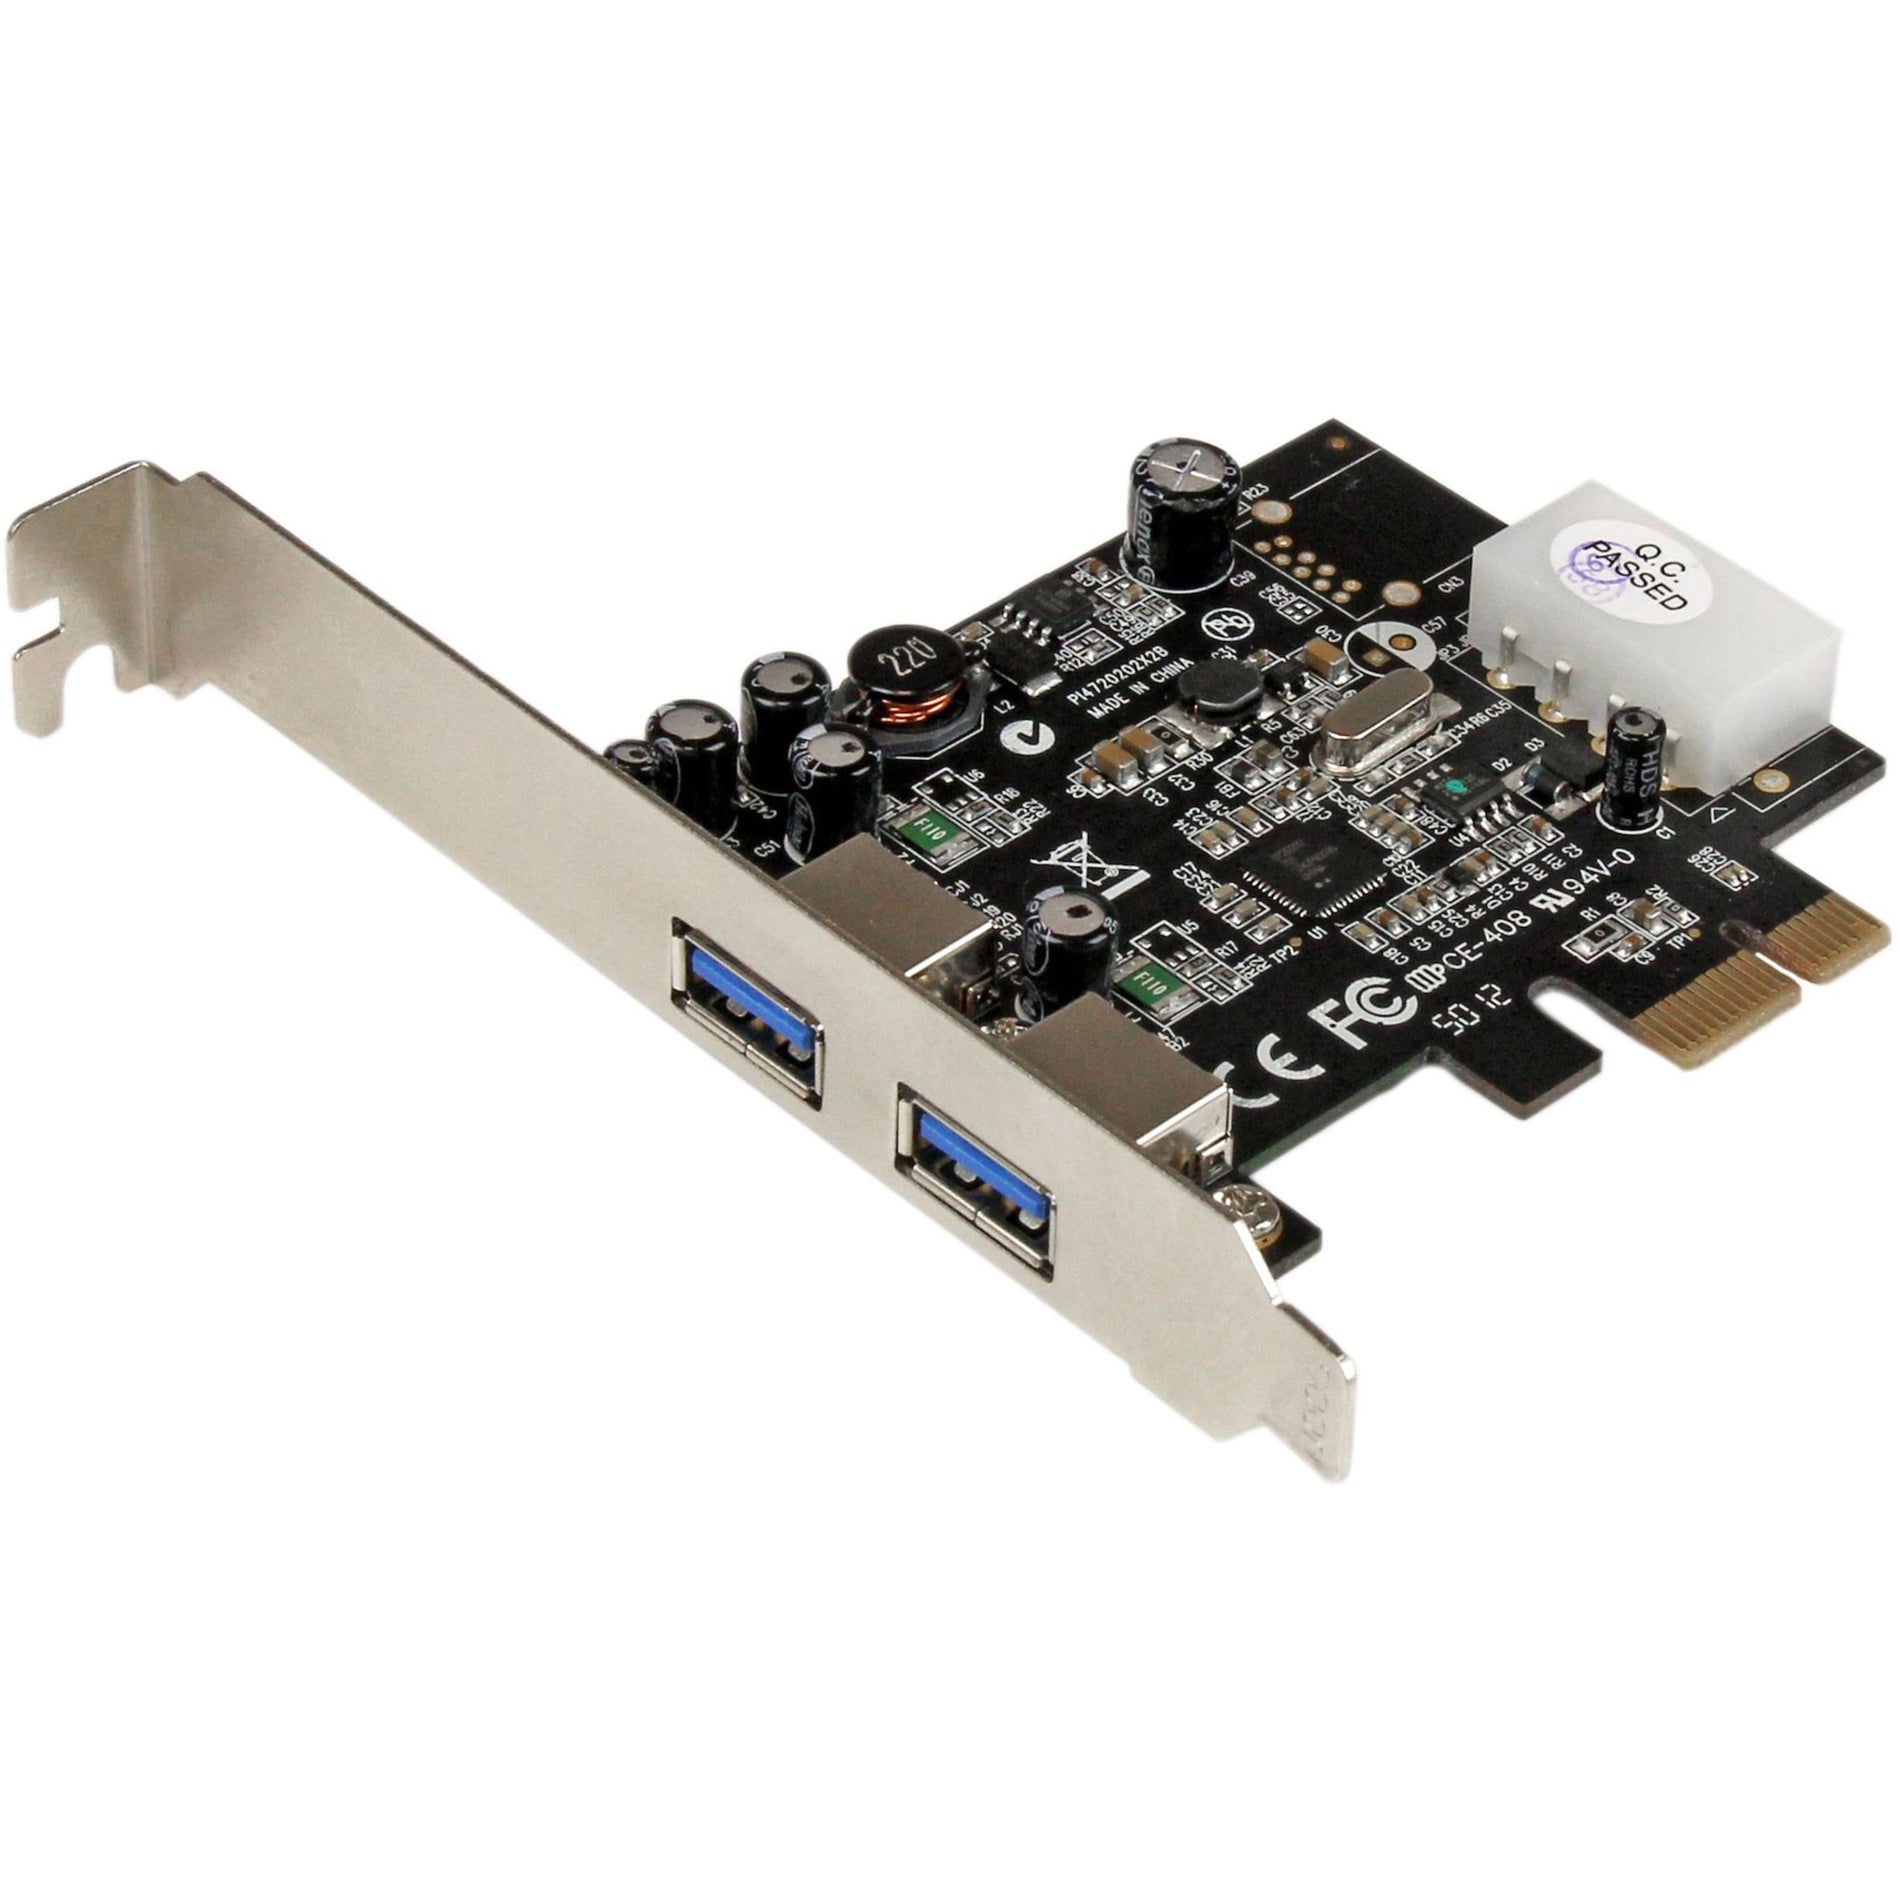 StarTech.com PEXUSB3S25 2 Port PCI Express PCIe SuperSpeed USB 3.0 Card Adapter with UASP, Low Profile Bracket, SATA to LP4 Cable